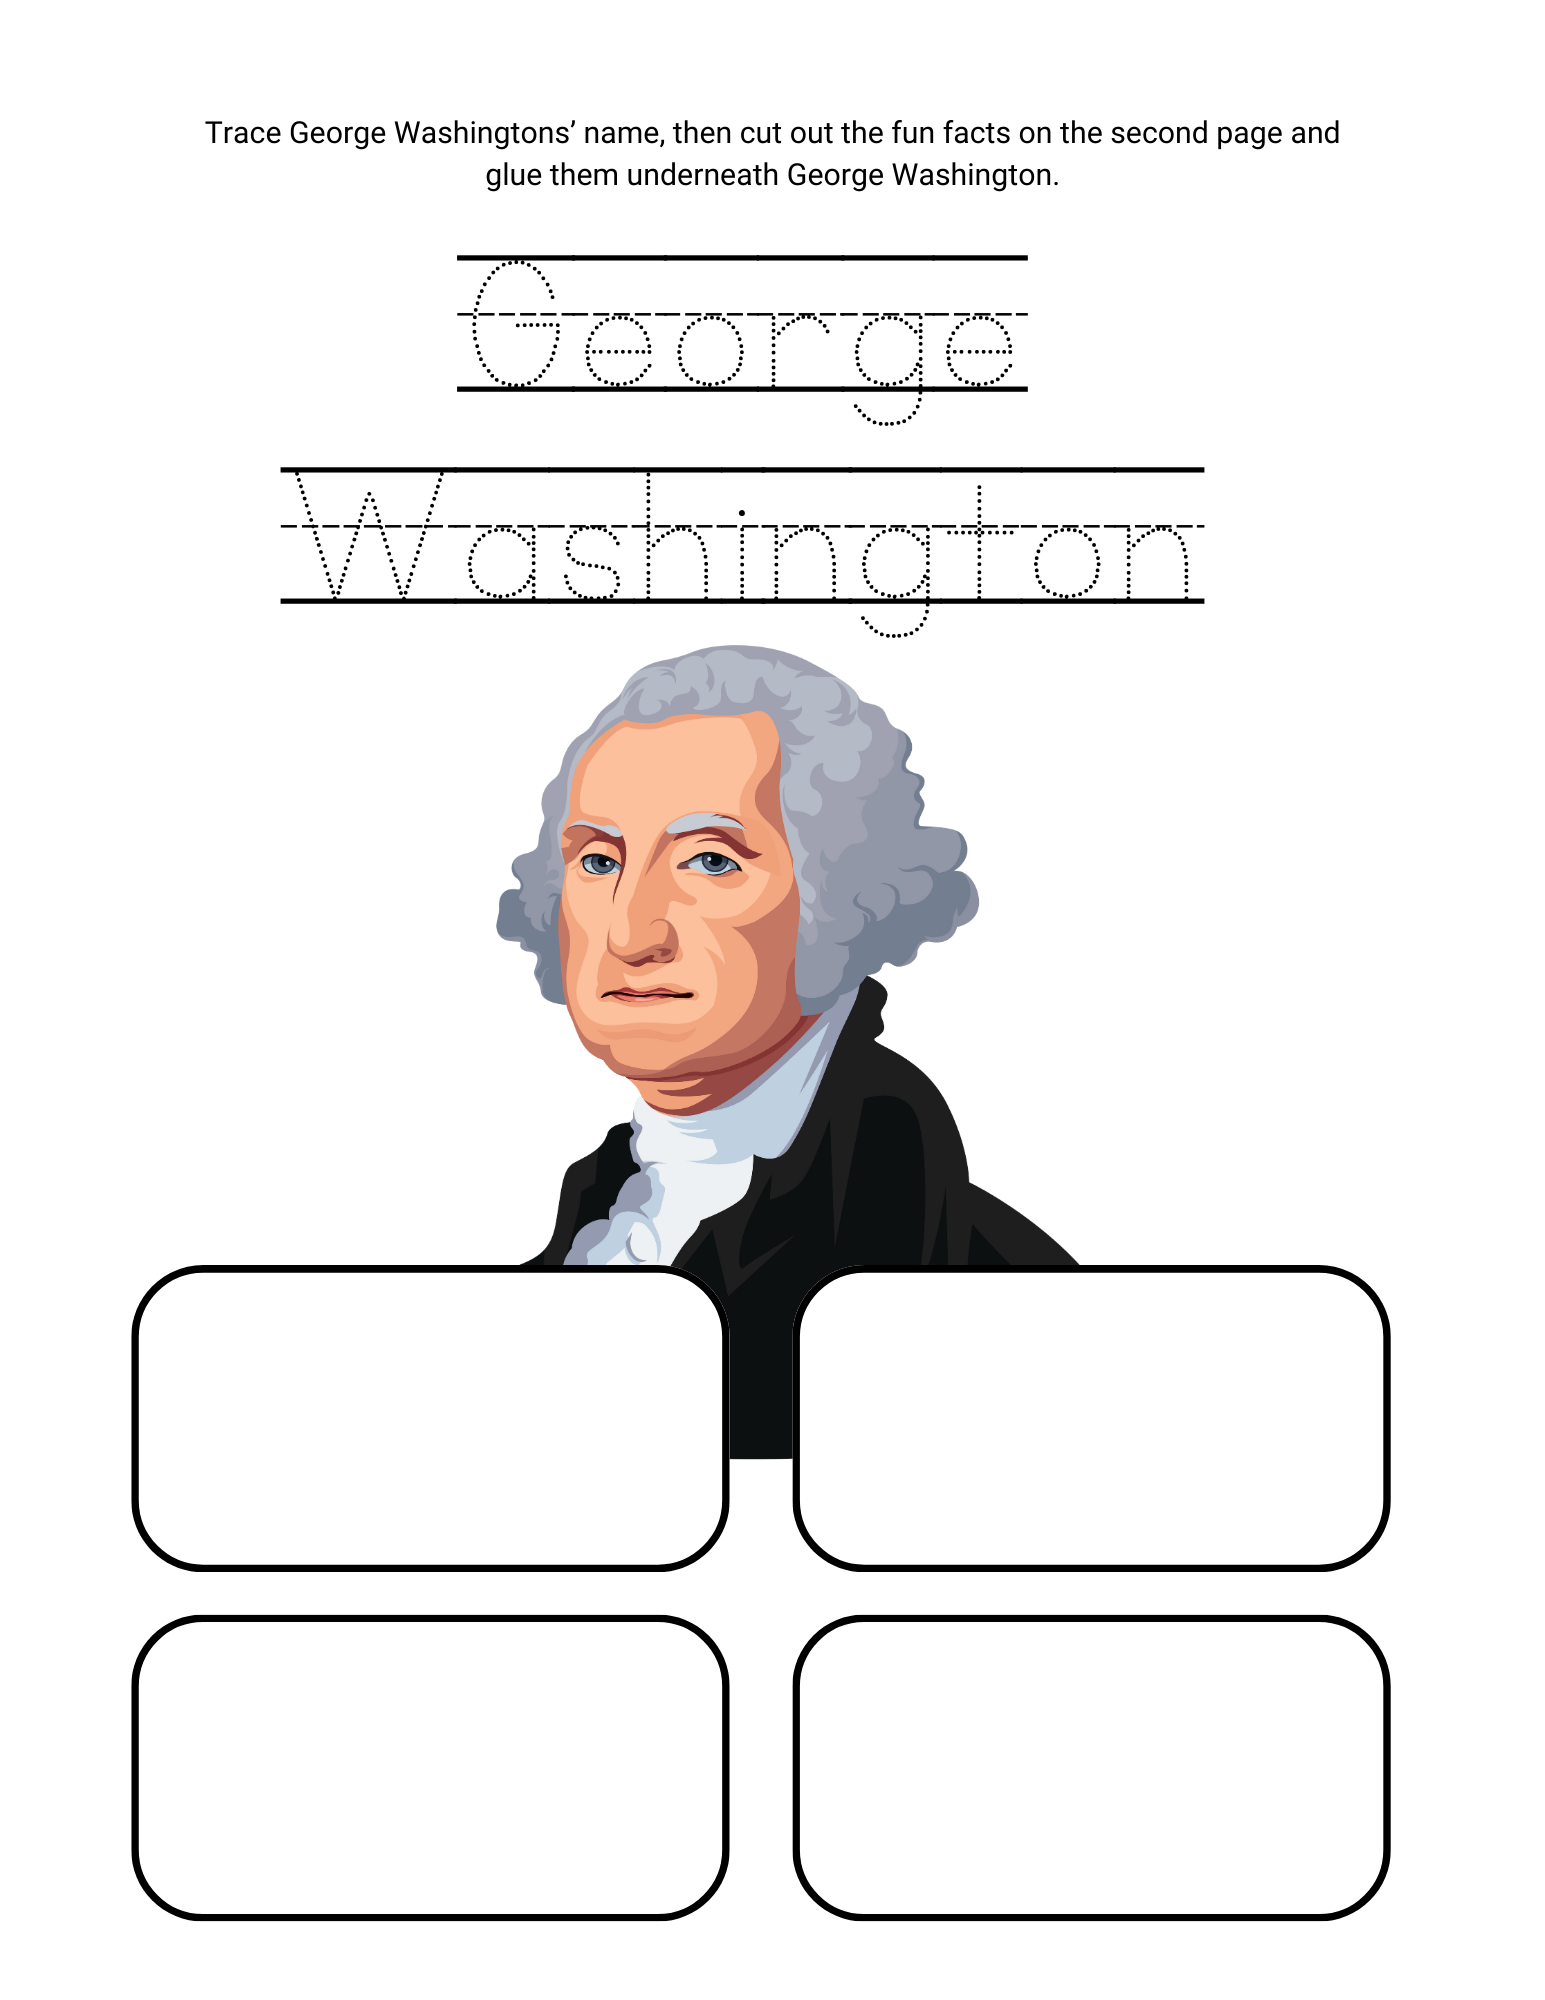 Was the first president of the United States of America.png__PID:d5179f89-f351-4d7c-bf80-33488e911291